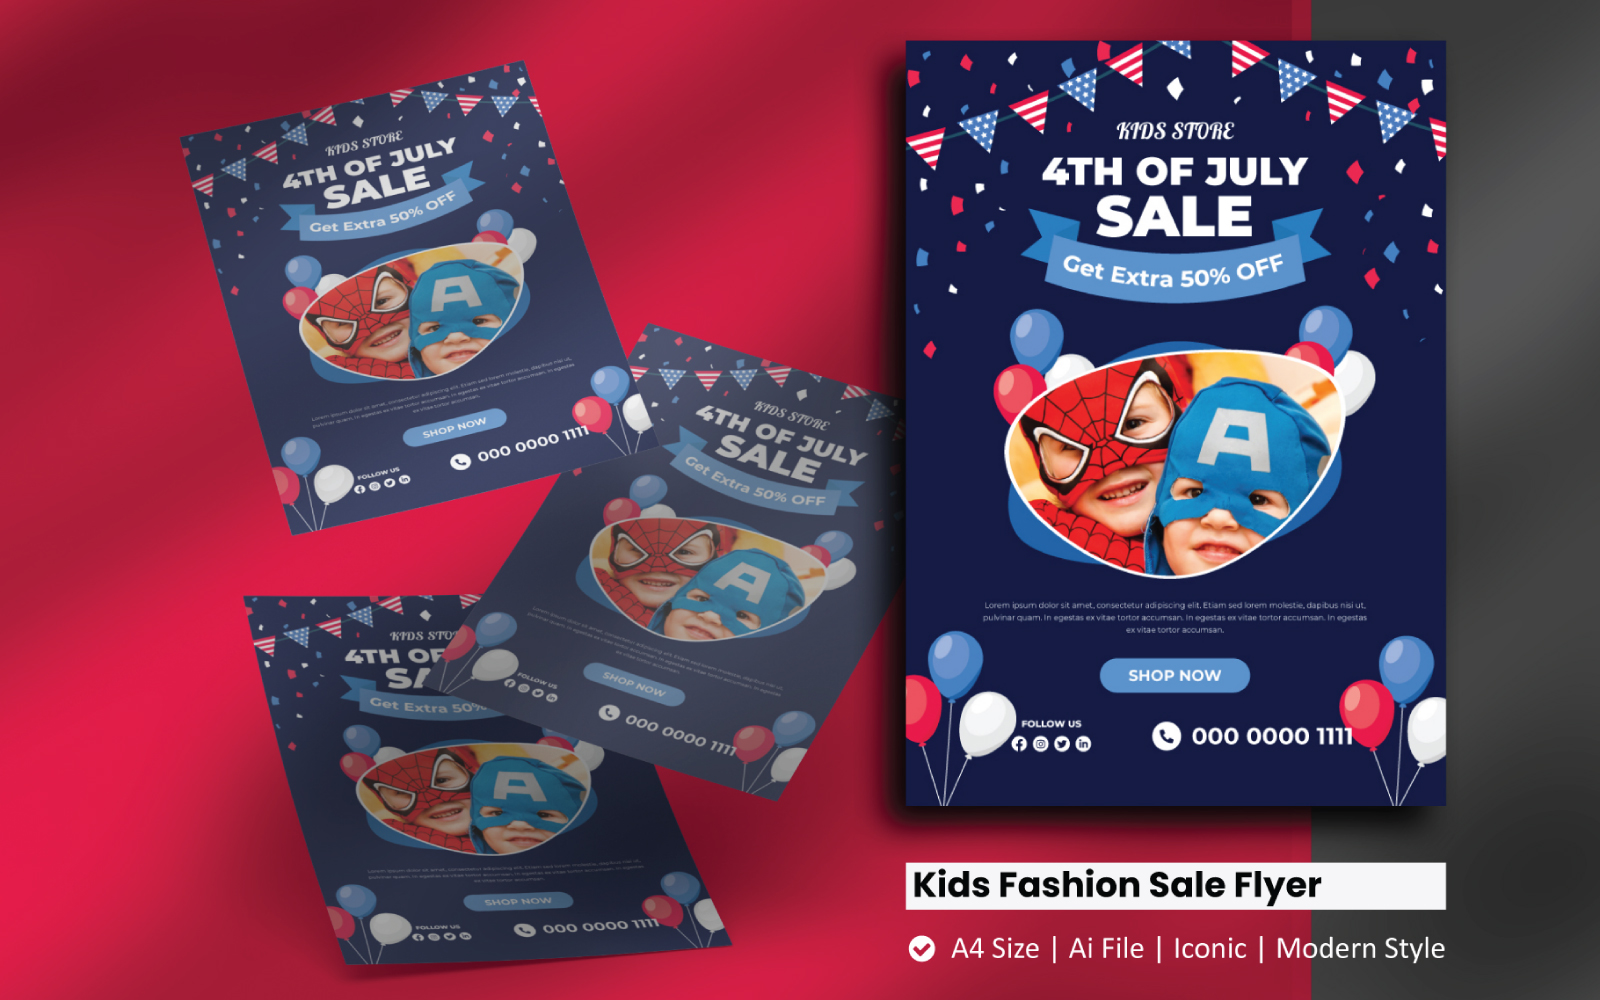 4th of July Kids Fashion Sale Flyer Corporate Identity Template